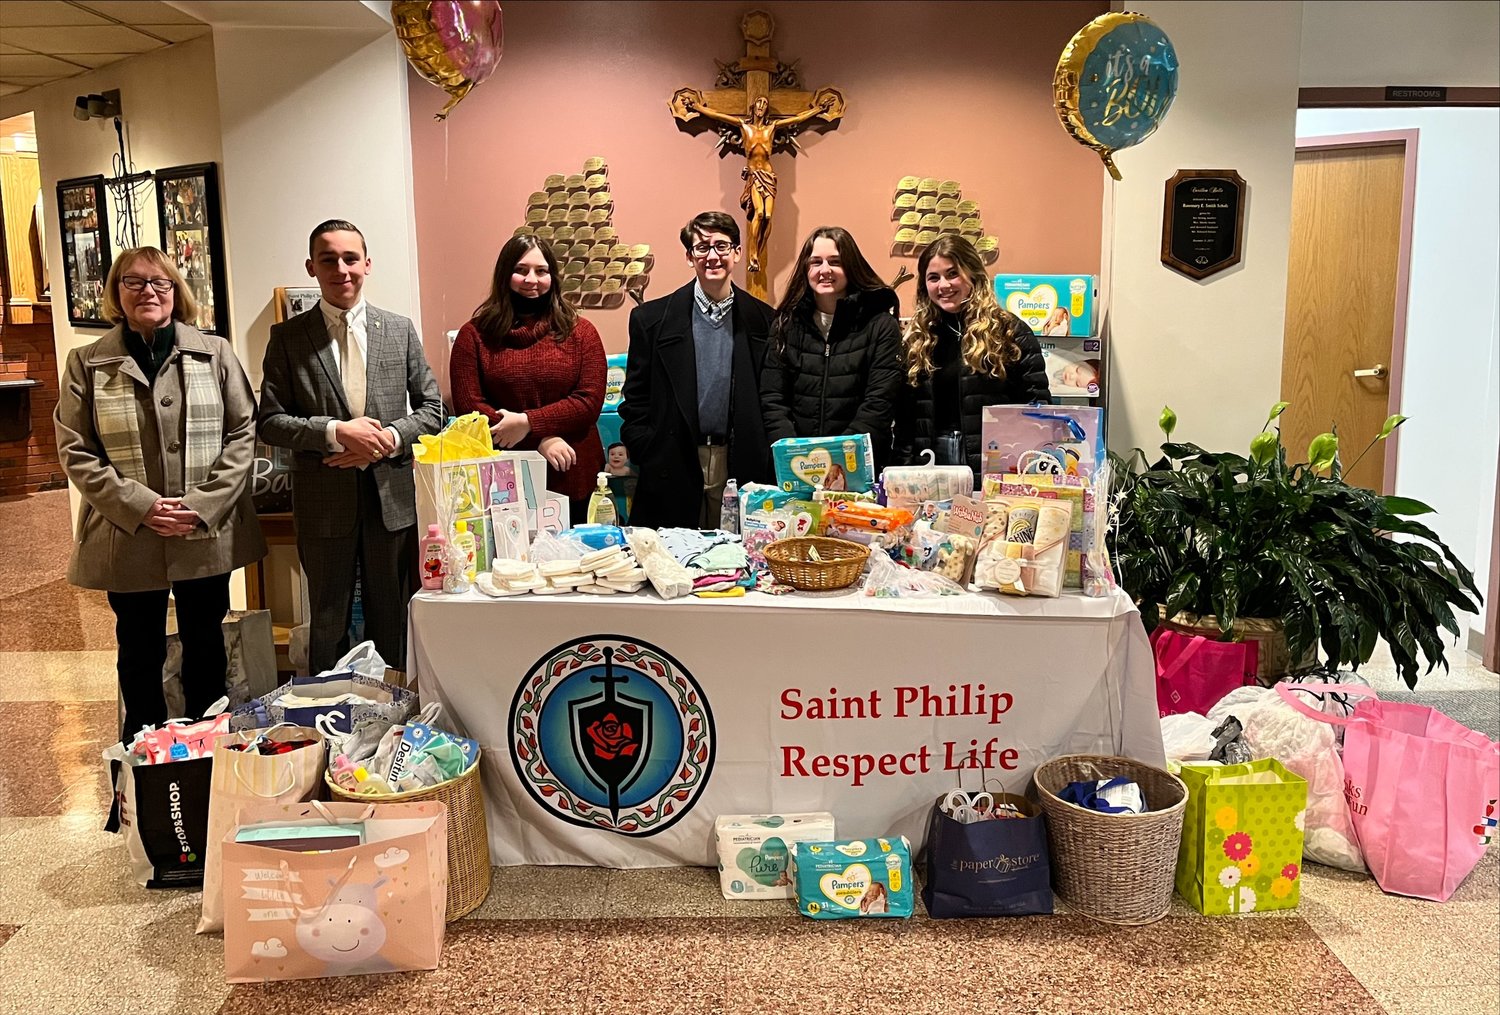 The school and parish communities came together over the weekend to collect baby gifts that will be donated to the Mother of Life Center to help pregnant women.